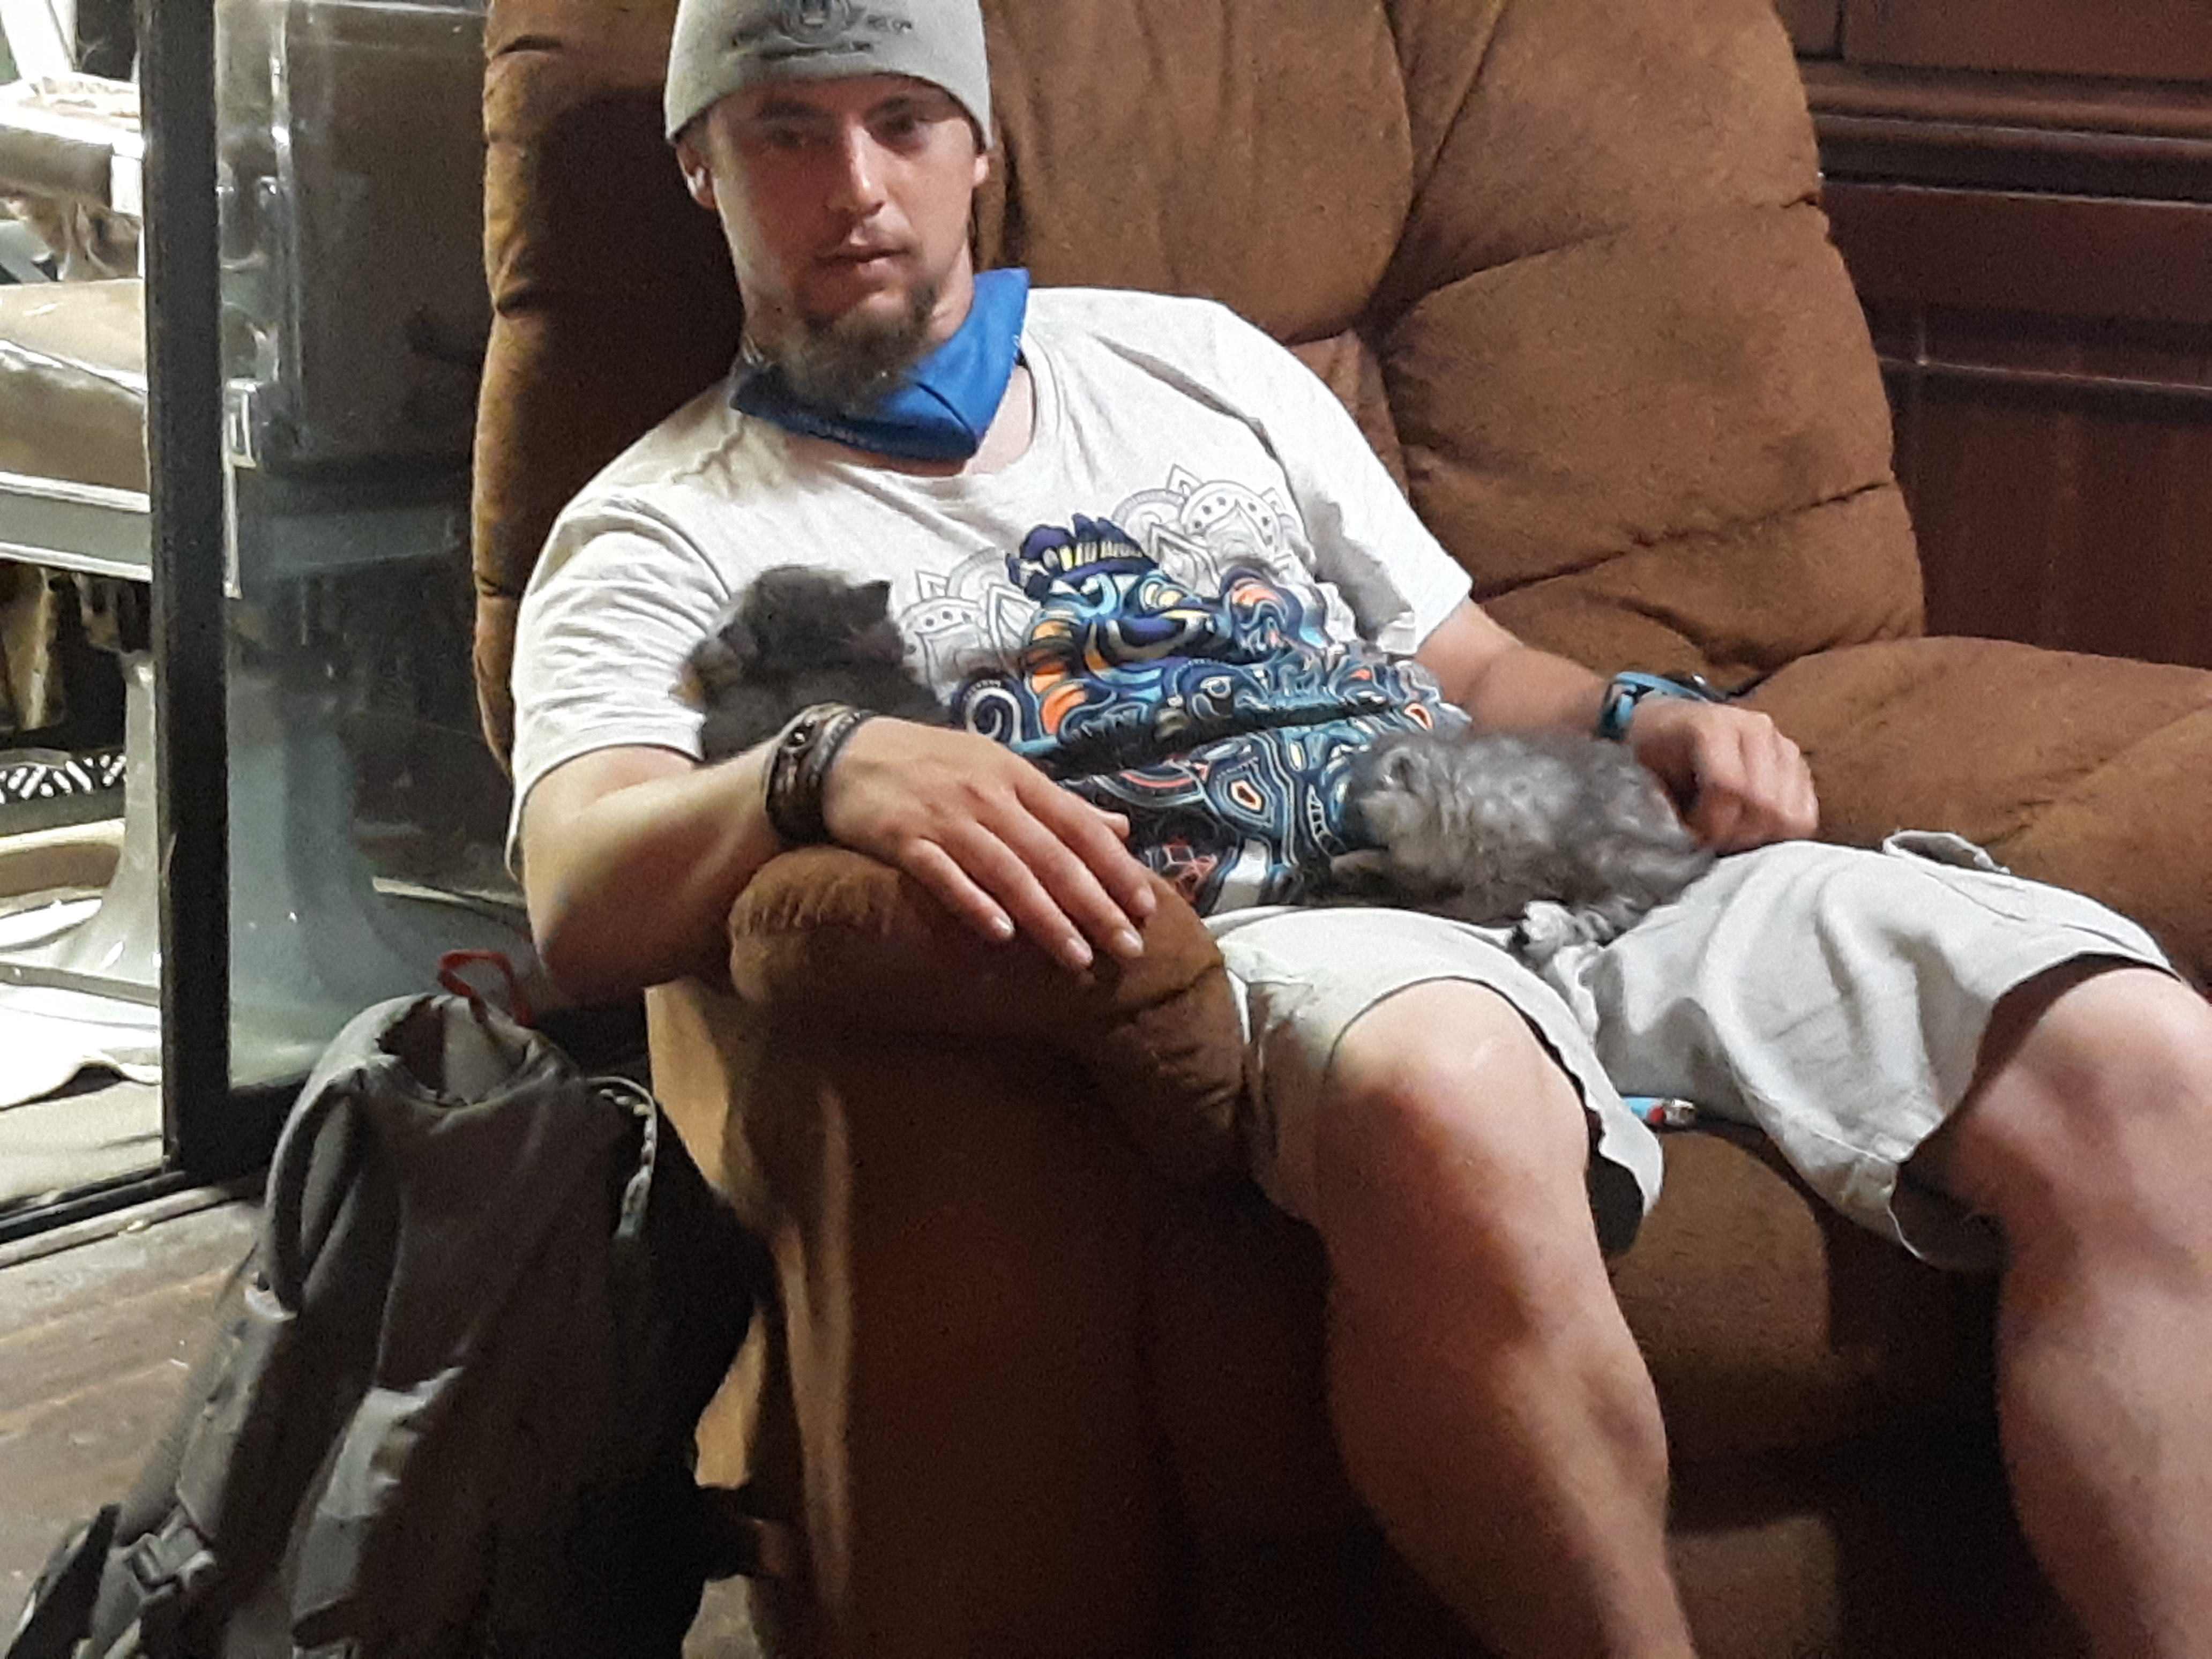 Photo of Evan Shockley. Evan is sitting on an oversized brown couch with two persian cats on his lap. He is wearing shorts and a t-shirt and beanie. Evan describes this photo as "chillin' with the persians".